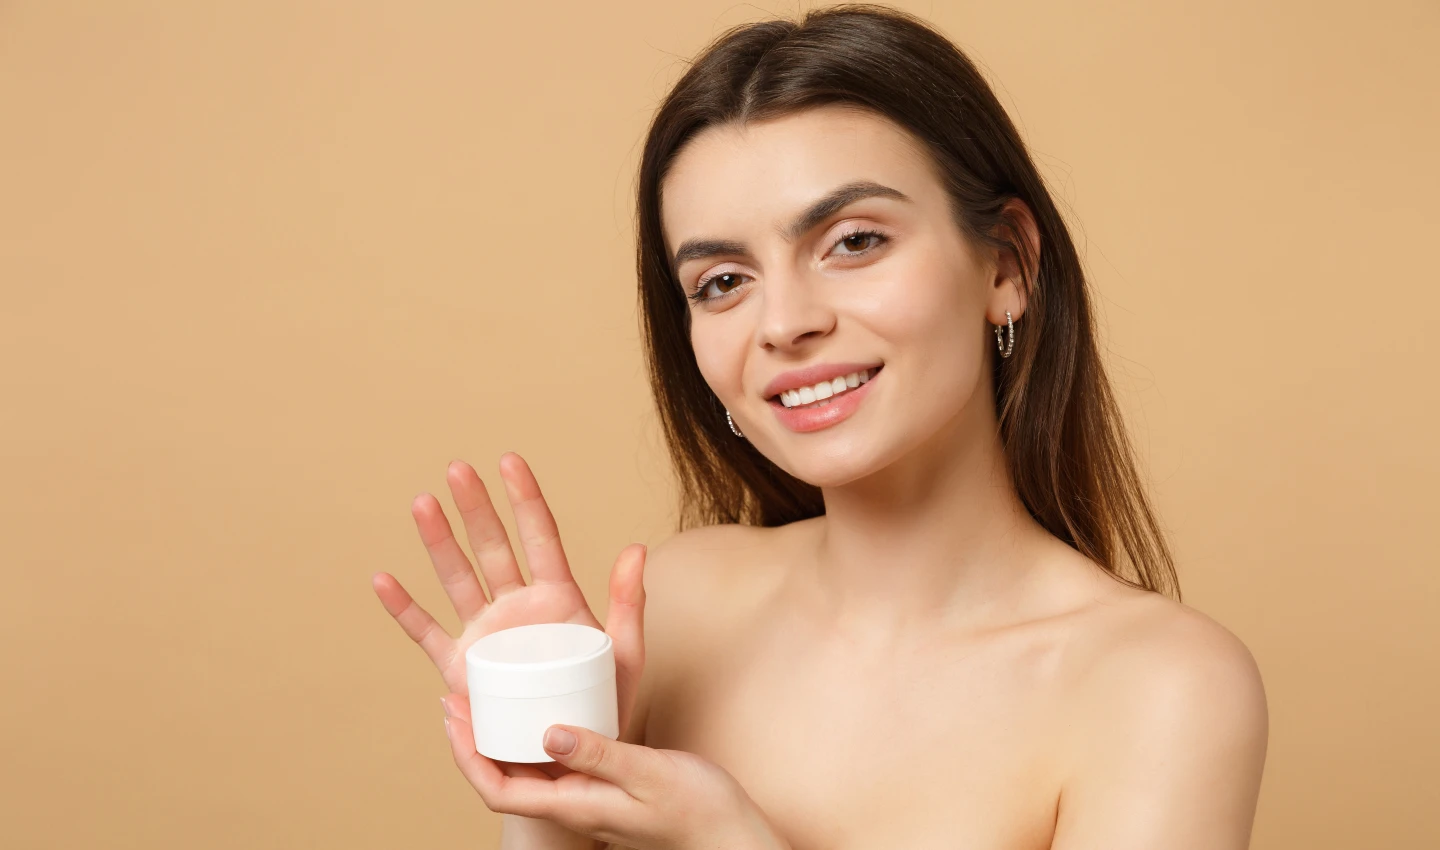 A woman holding a bottle of sunscreen cream, promoting its benefits for nourished and protected skin.